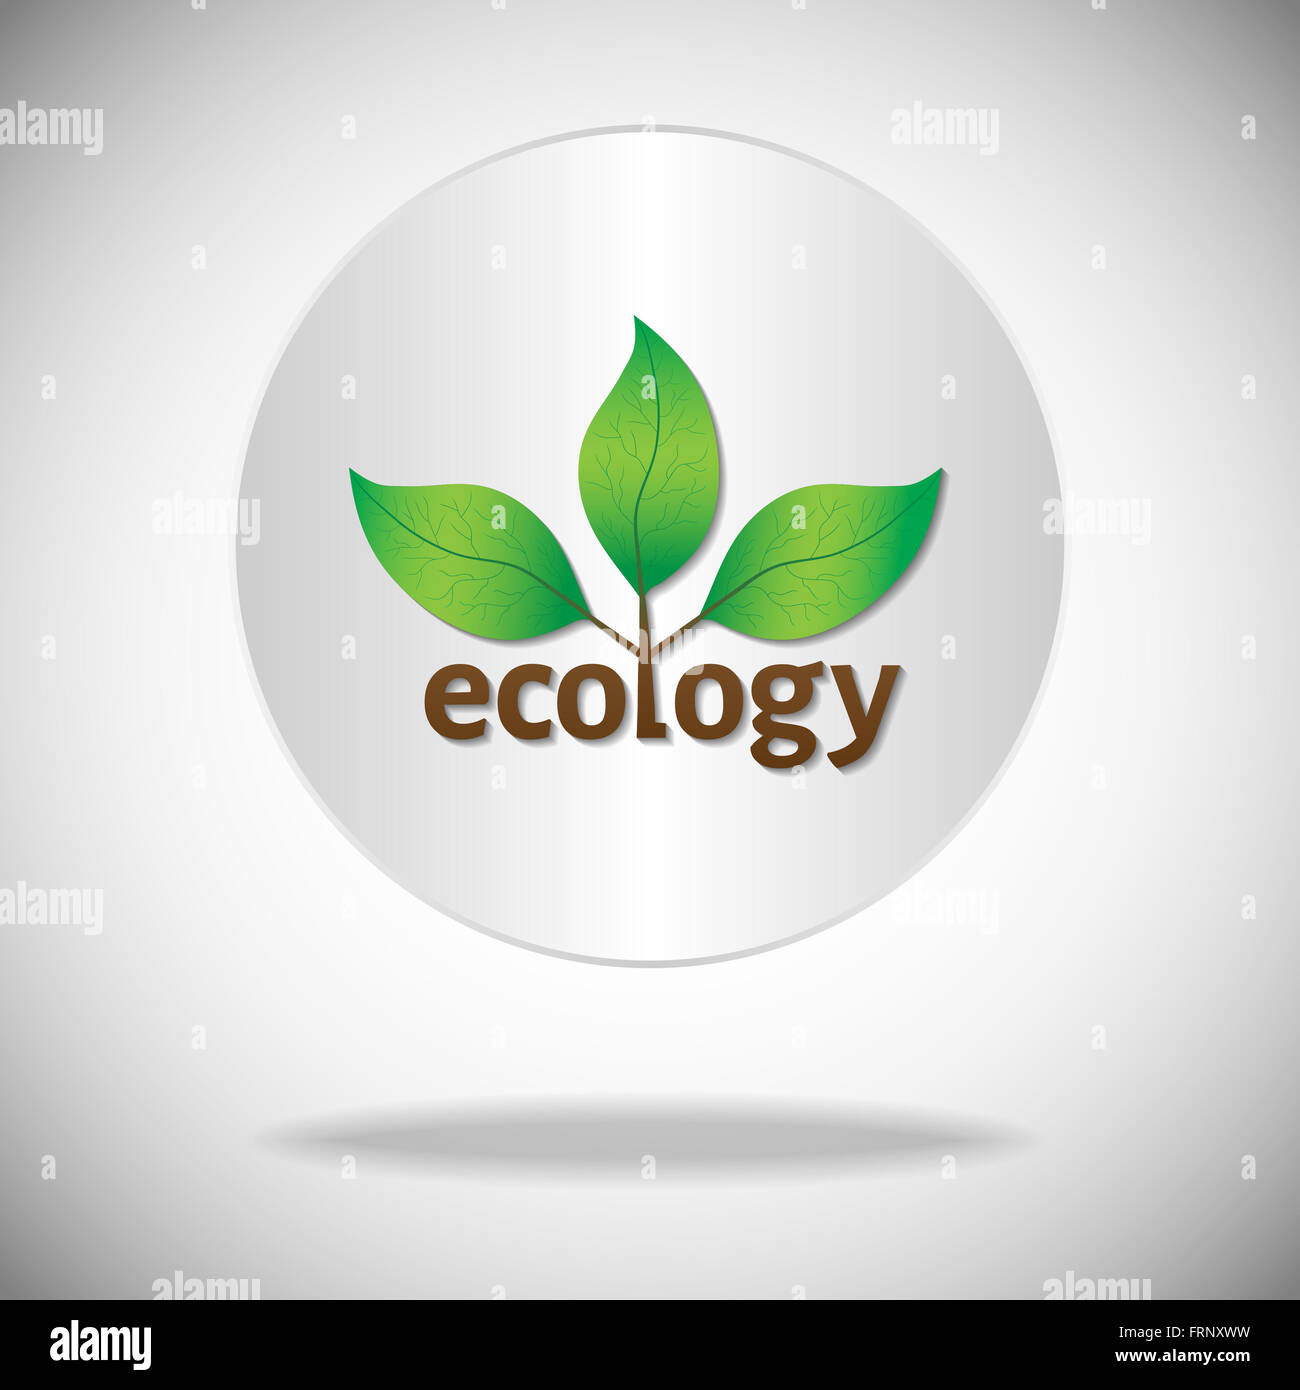 Ecological or environmental icon or logo. Green leaves on a tree with ecology brown text on a white circle background. Stock Photo